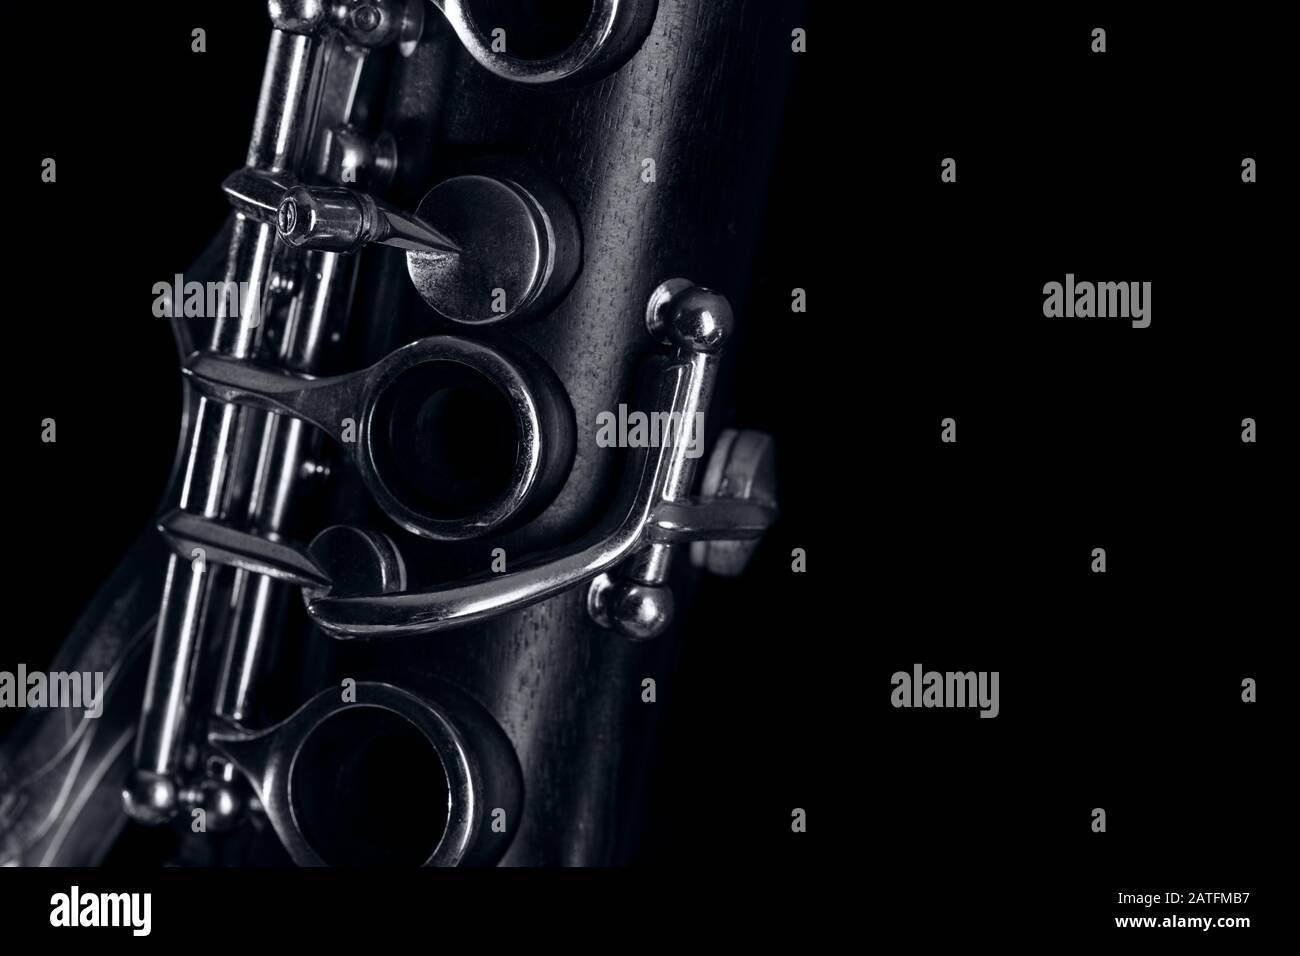 part of the clarinet body, with the silver mechanisms on the wood. Black background and free space for text Stock Photo